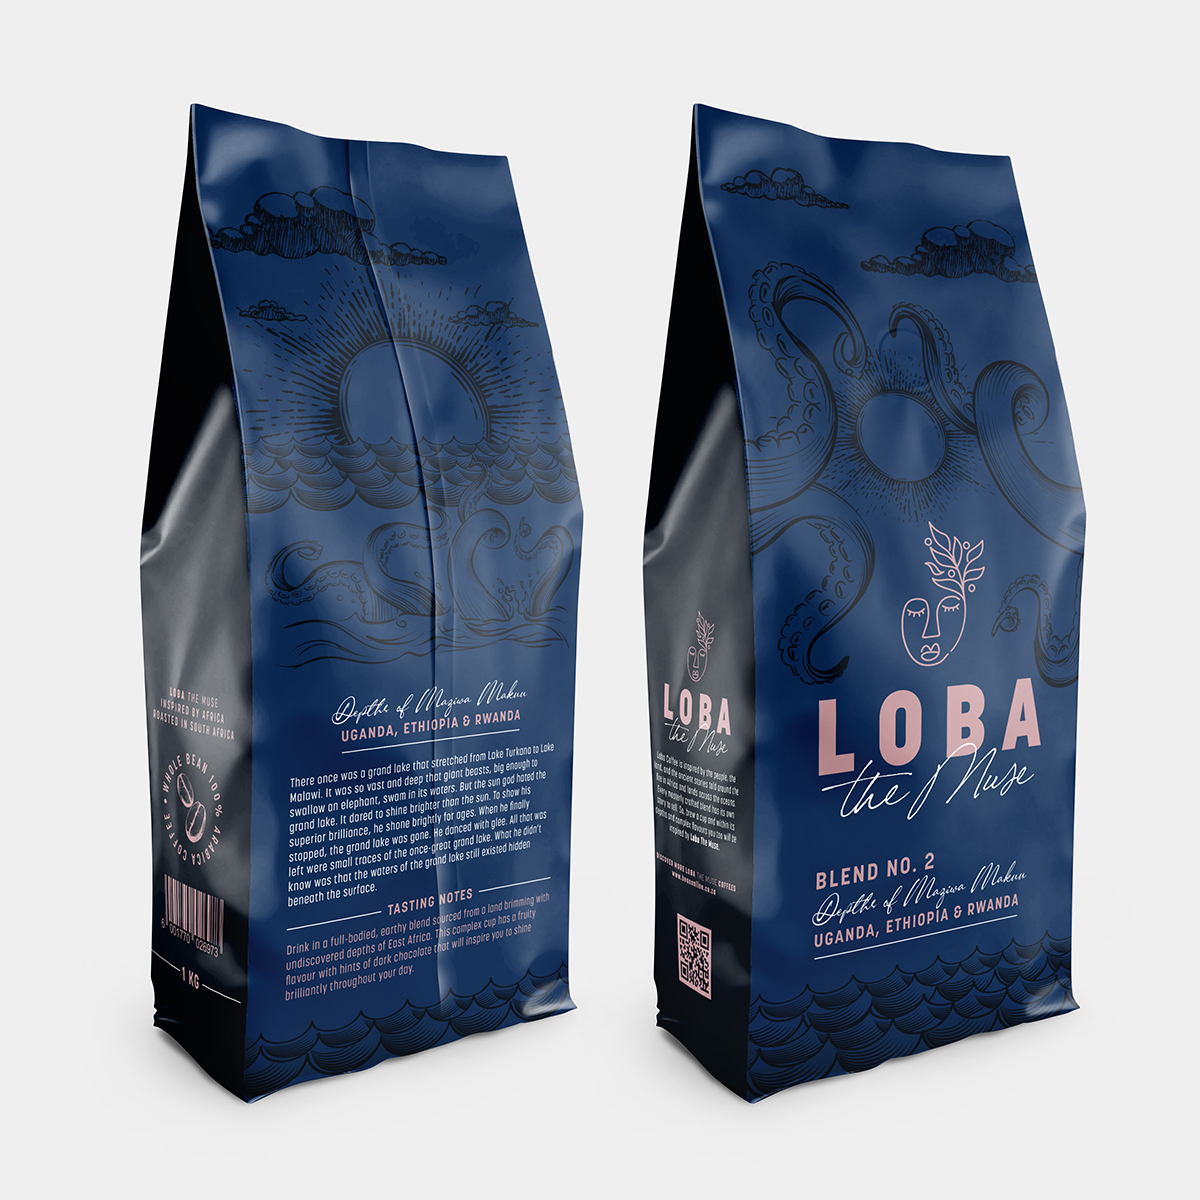 Loba Coffee - 5 blends from 5 different coffee growing regions